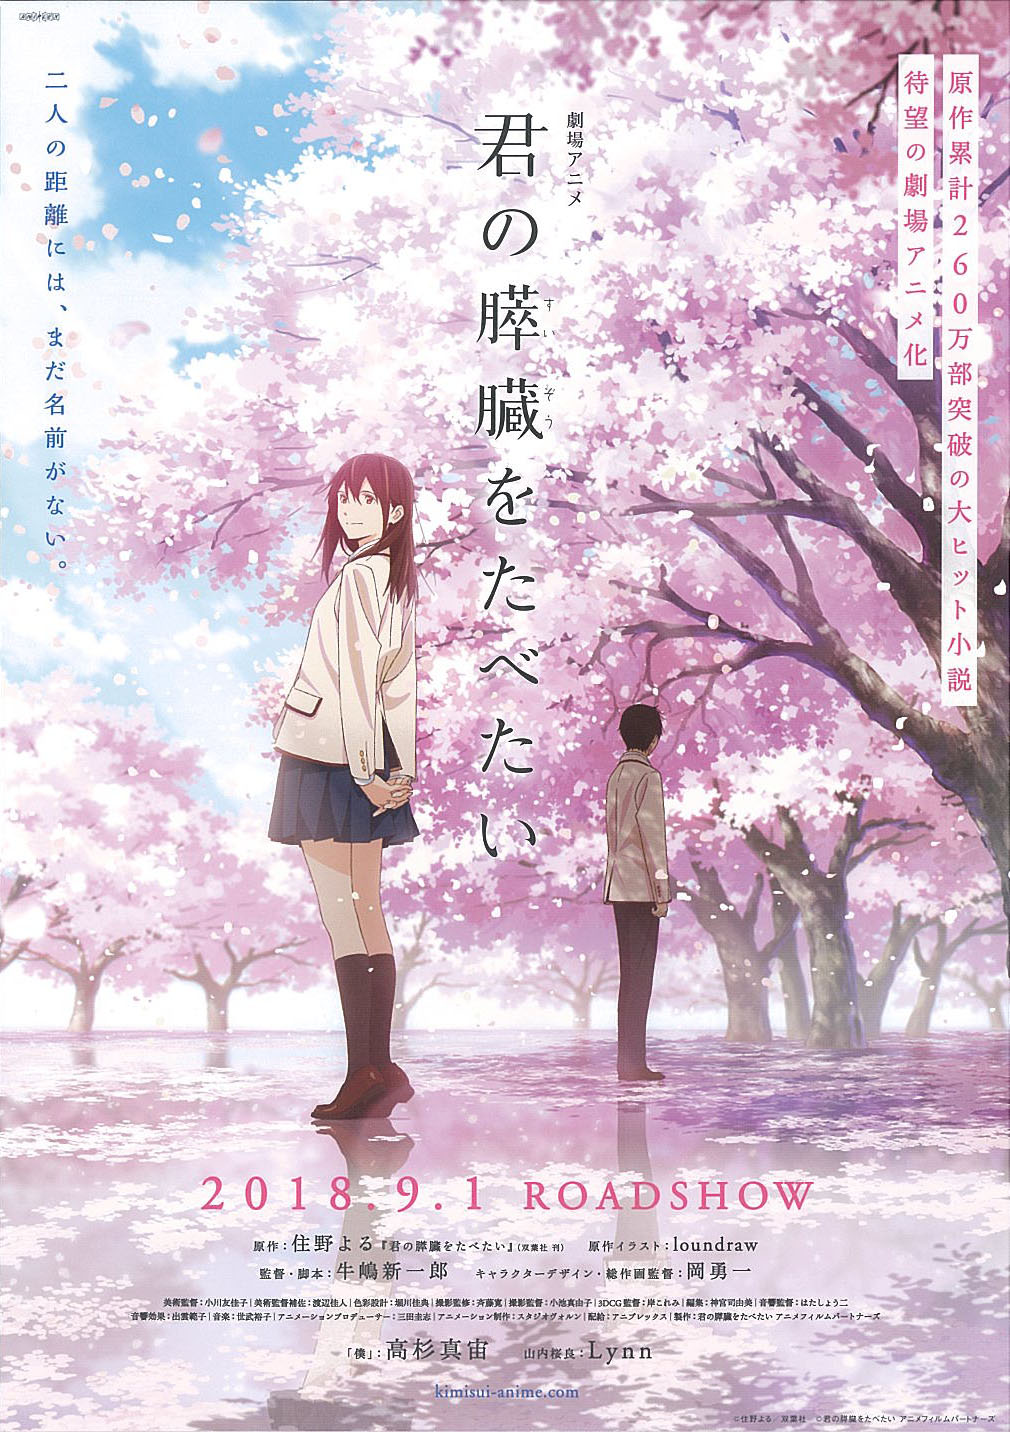 PennsylvAsia: Tickets now available for I Want To Eat Your Pancreas  (君の膵臓をたべたい) in Pittsburgh, from February 7.